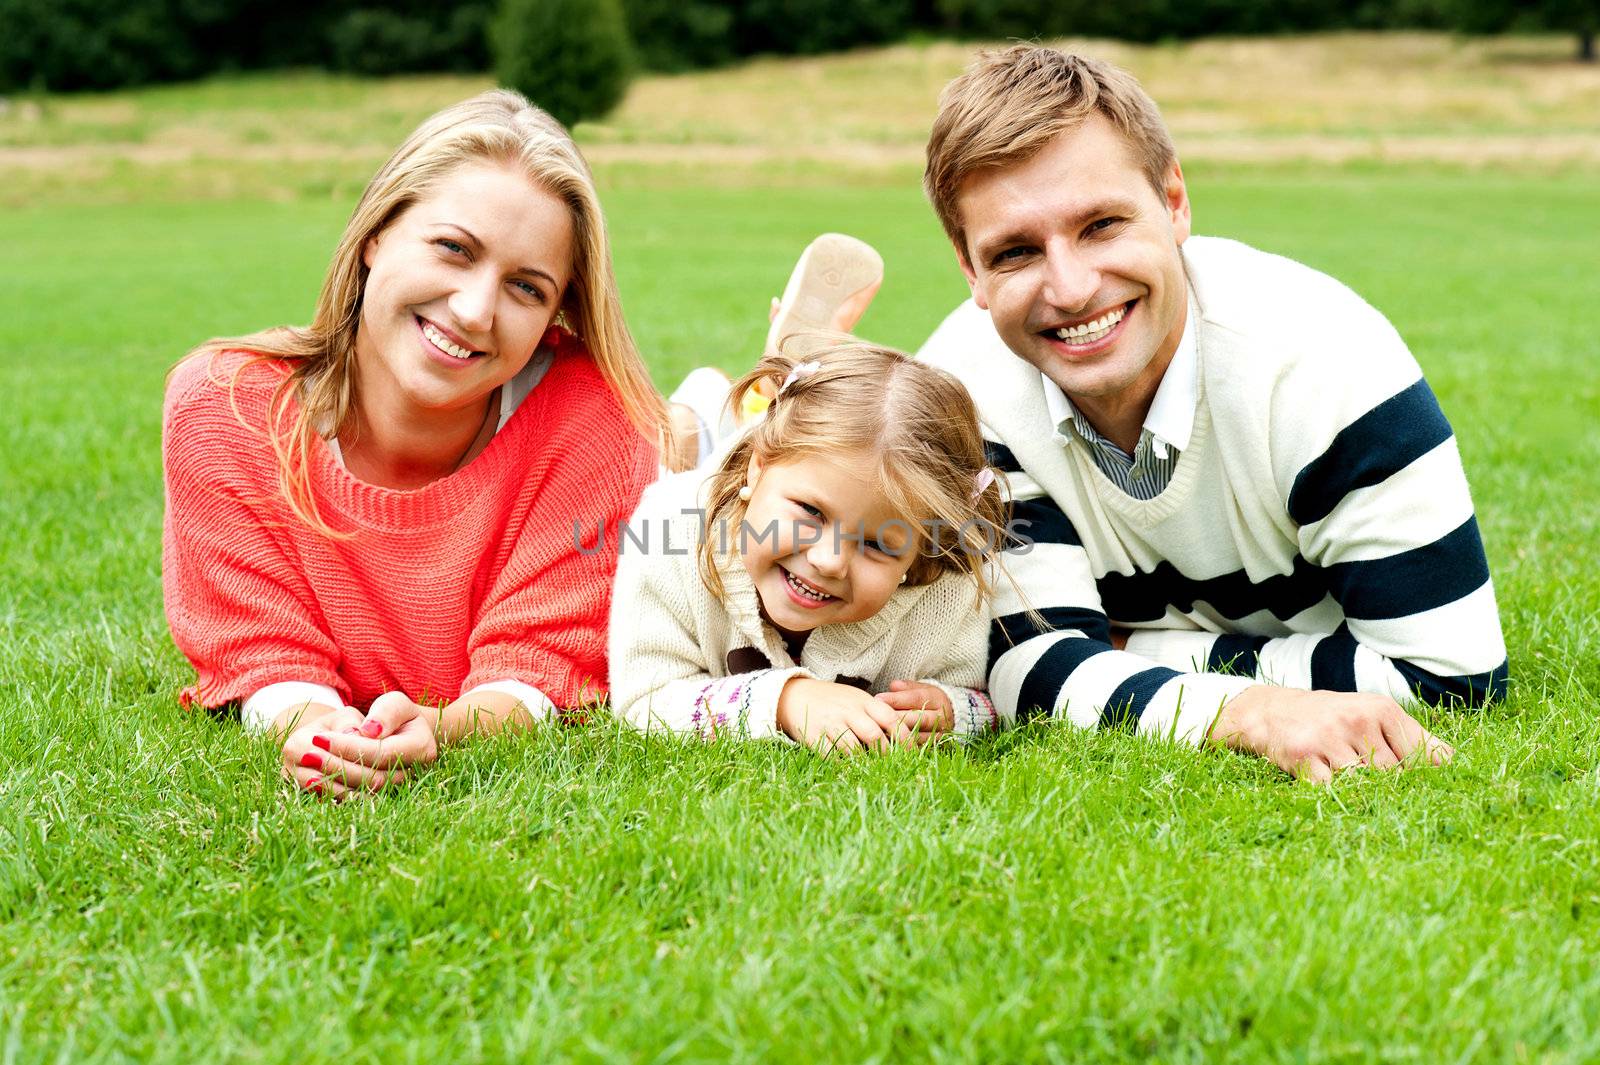 Young family of three spending a happy day outdoors. Relaxing on lush green grass